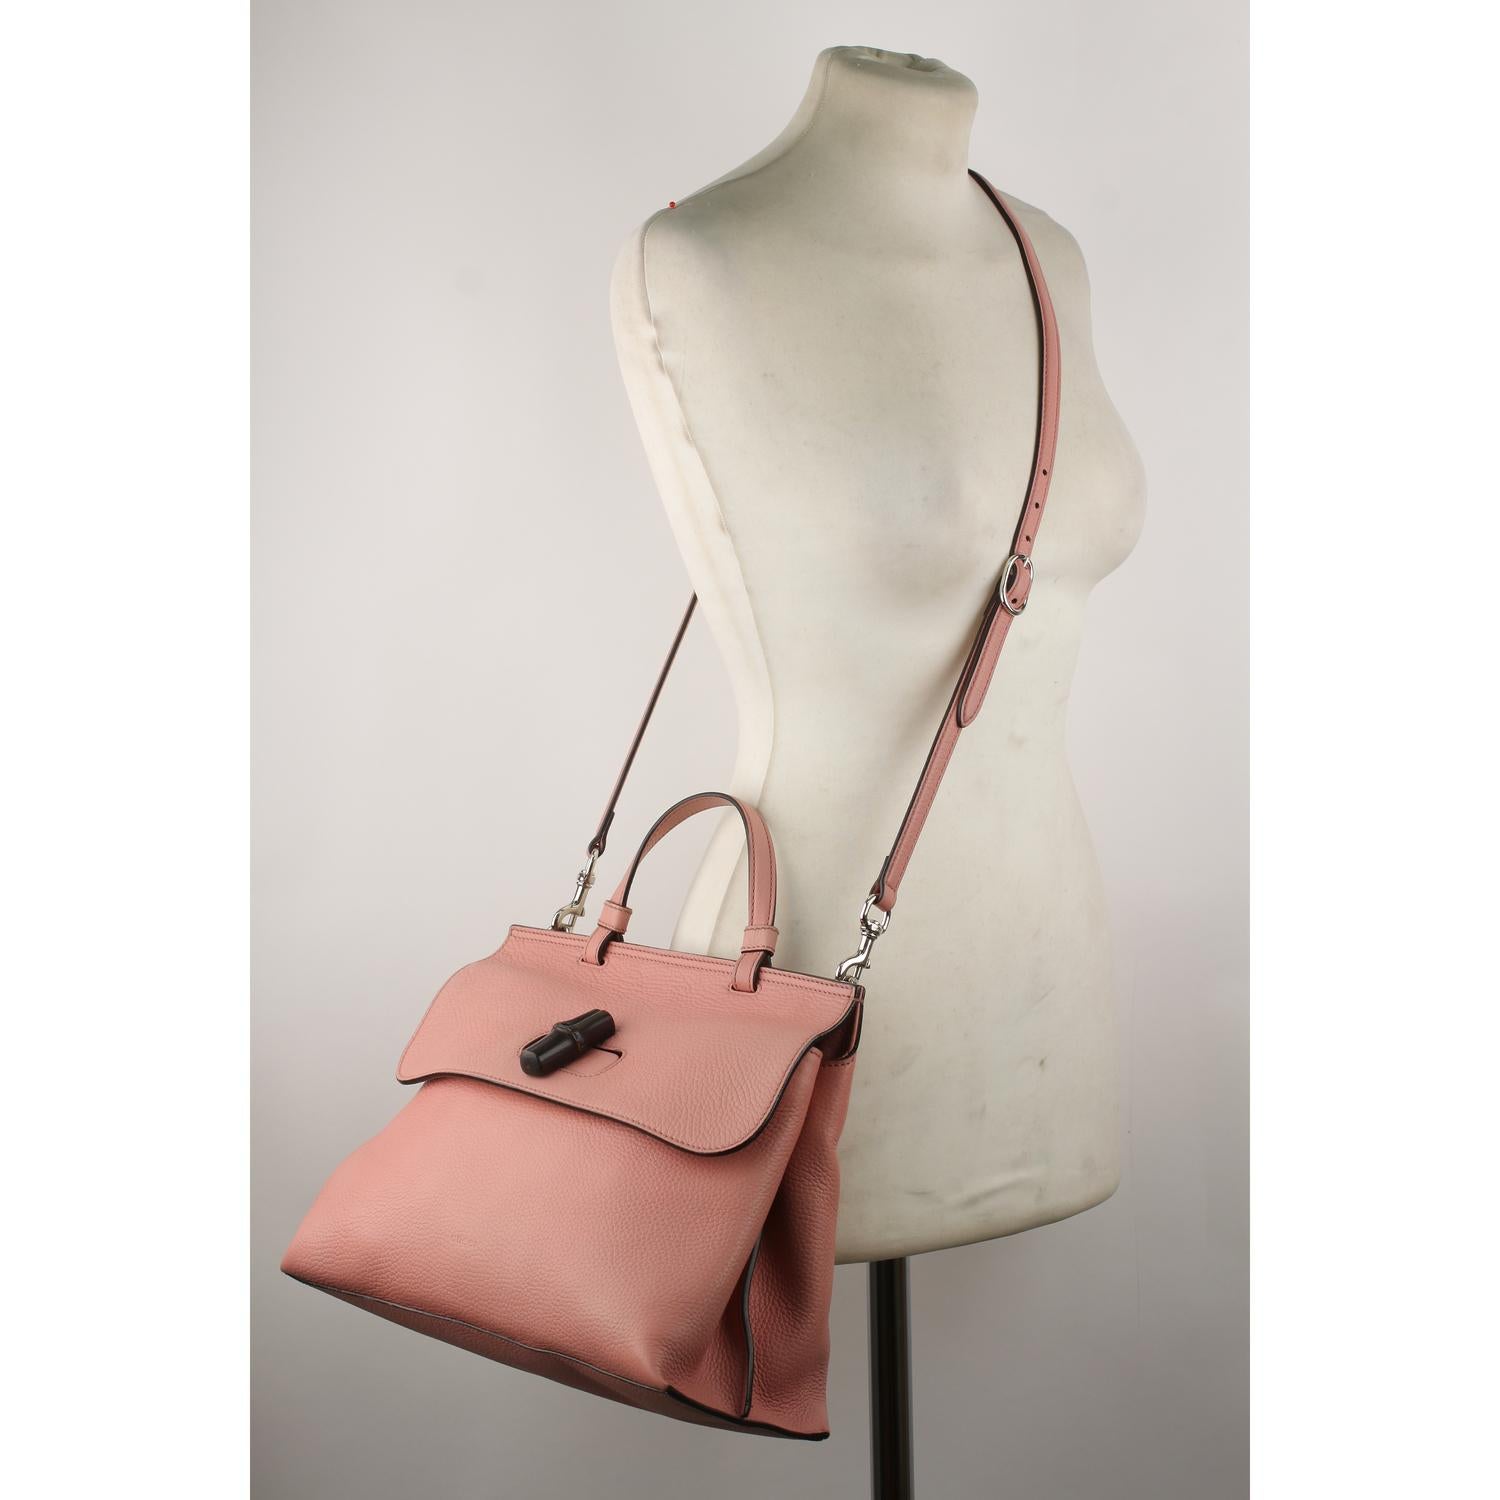 Gucci Pink Leather Daily Bamboo Satchel Top Handle Bag 1